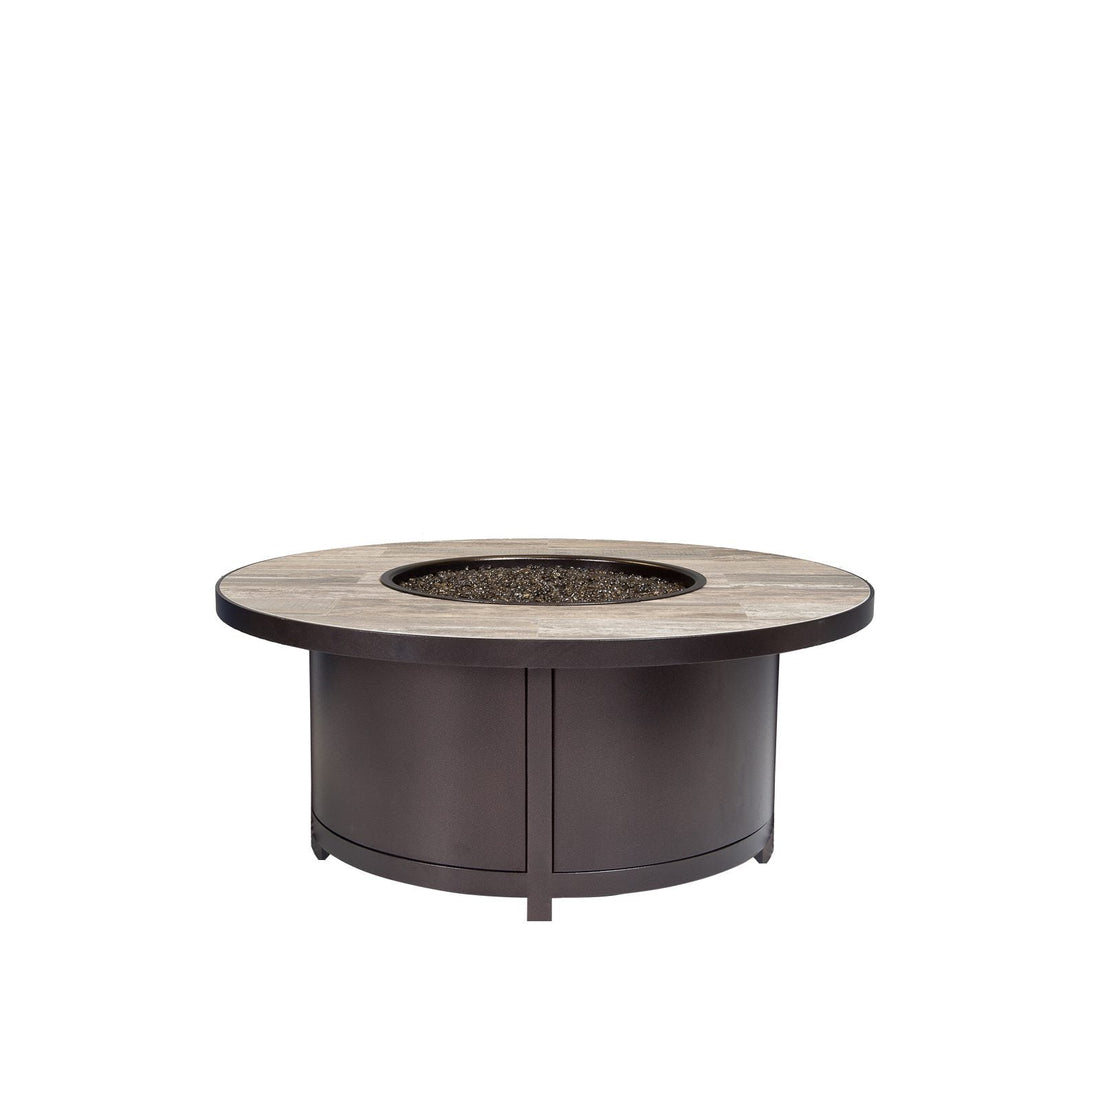 Elba Round Occasional Height Fire Pit